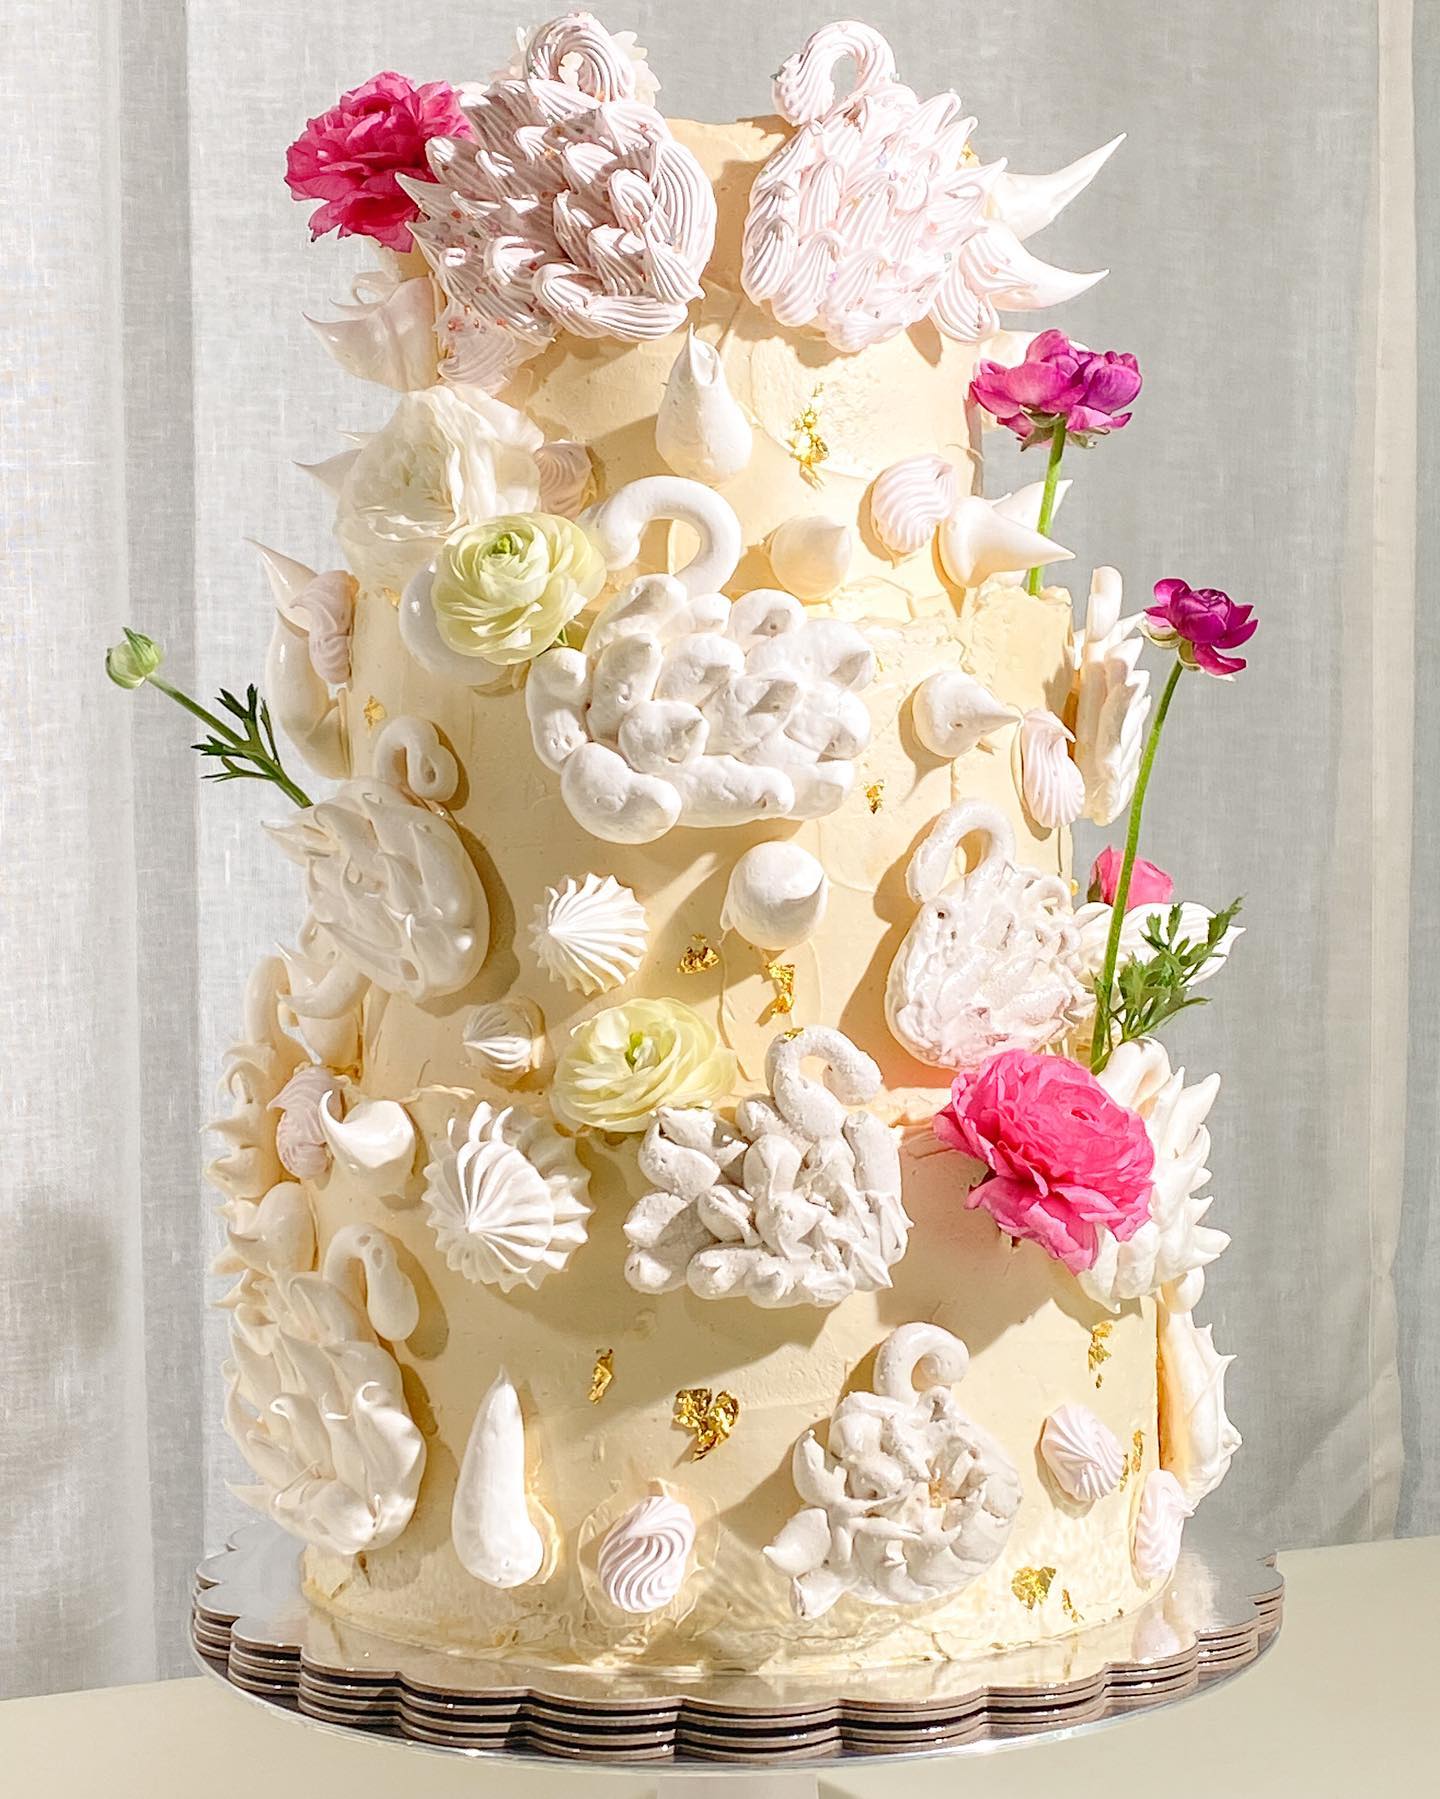 A spring wedding cake with cardamom, strawberry, vanilla, and dates, featuring fluffy swans by @dreamcaketestkitchen